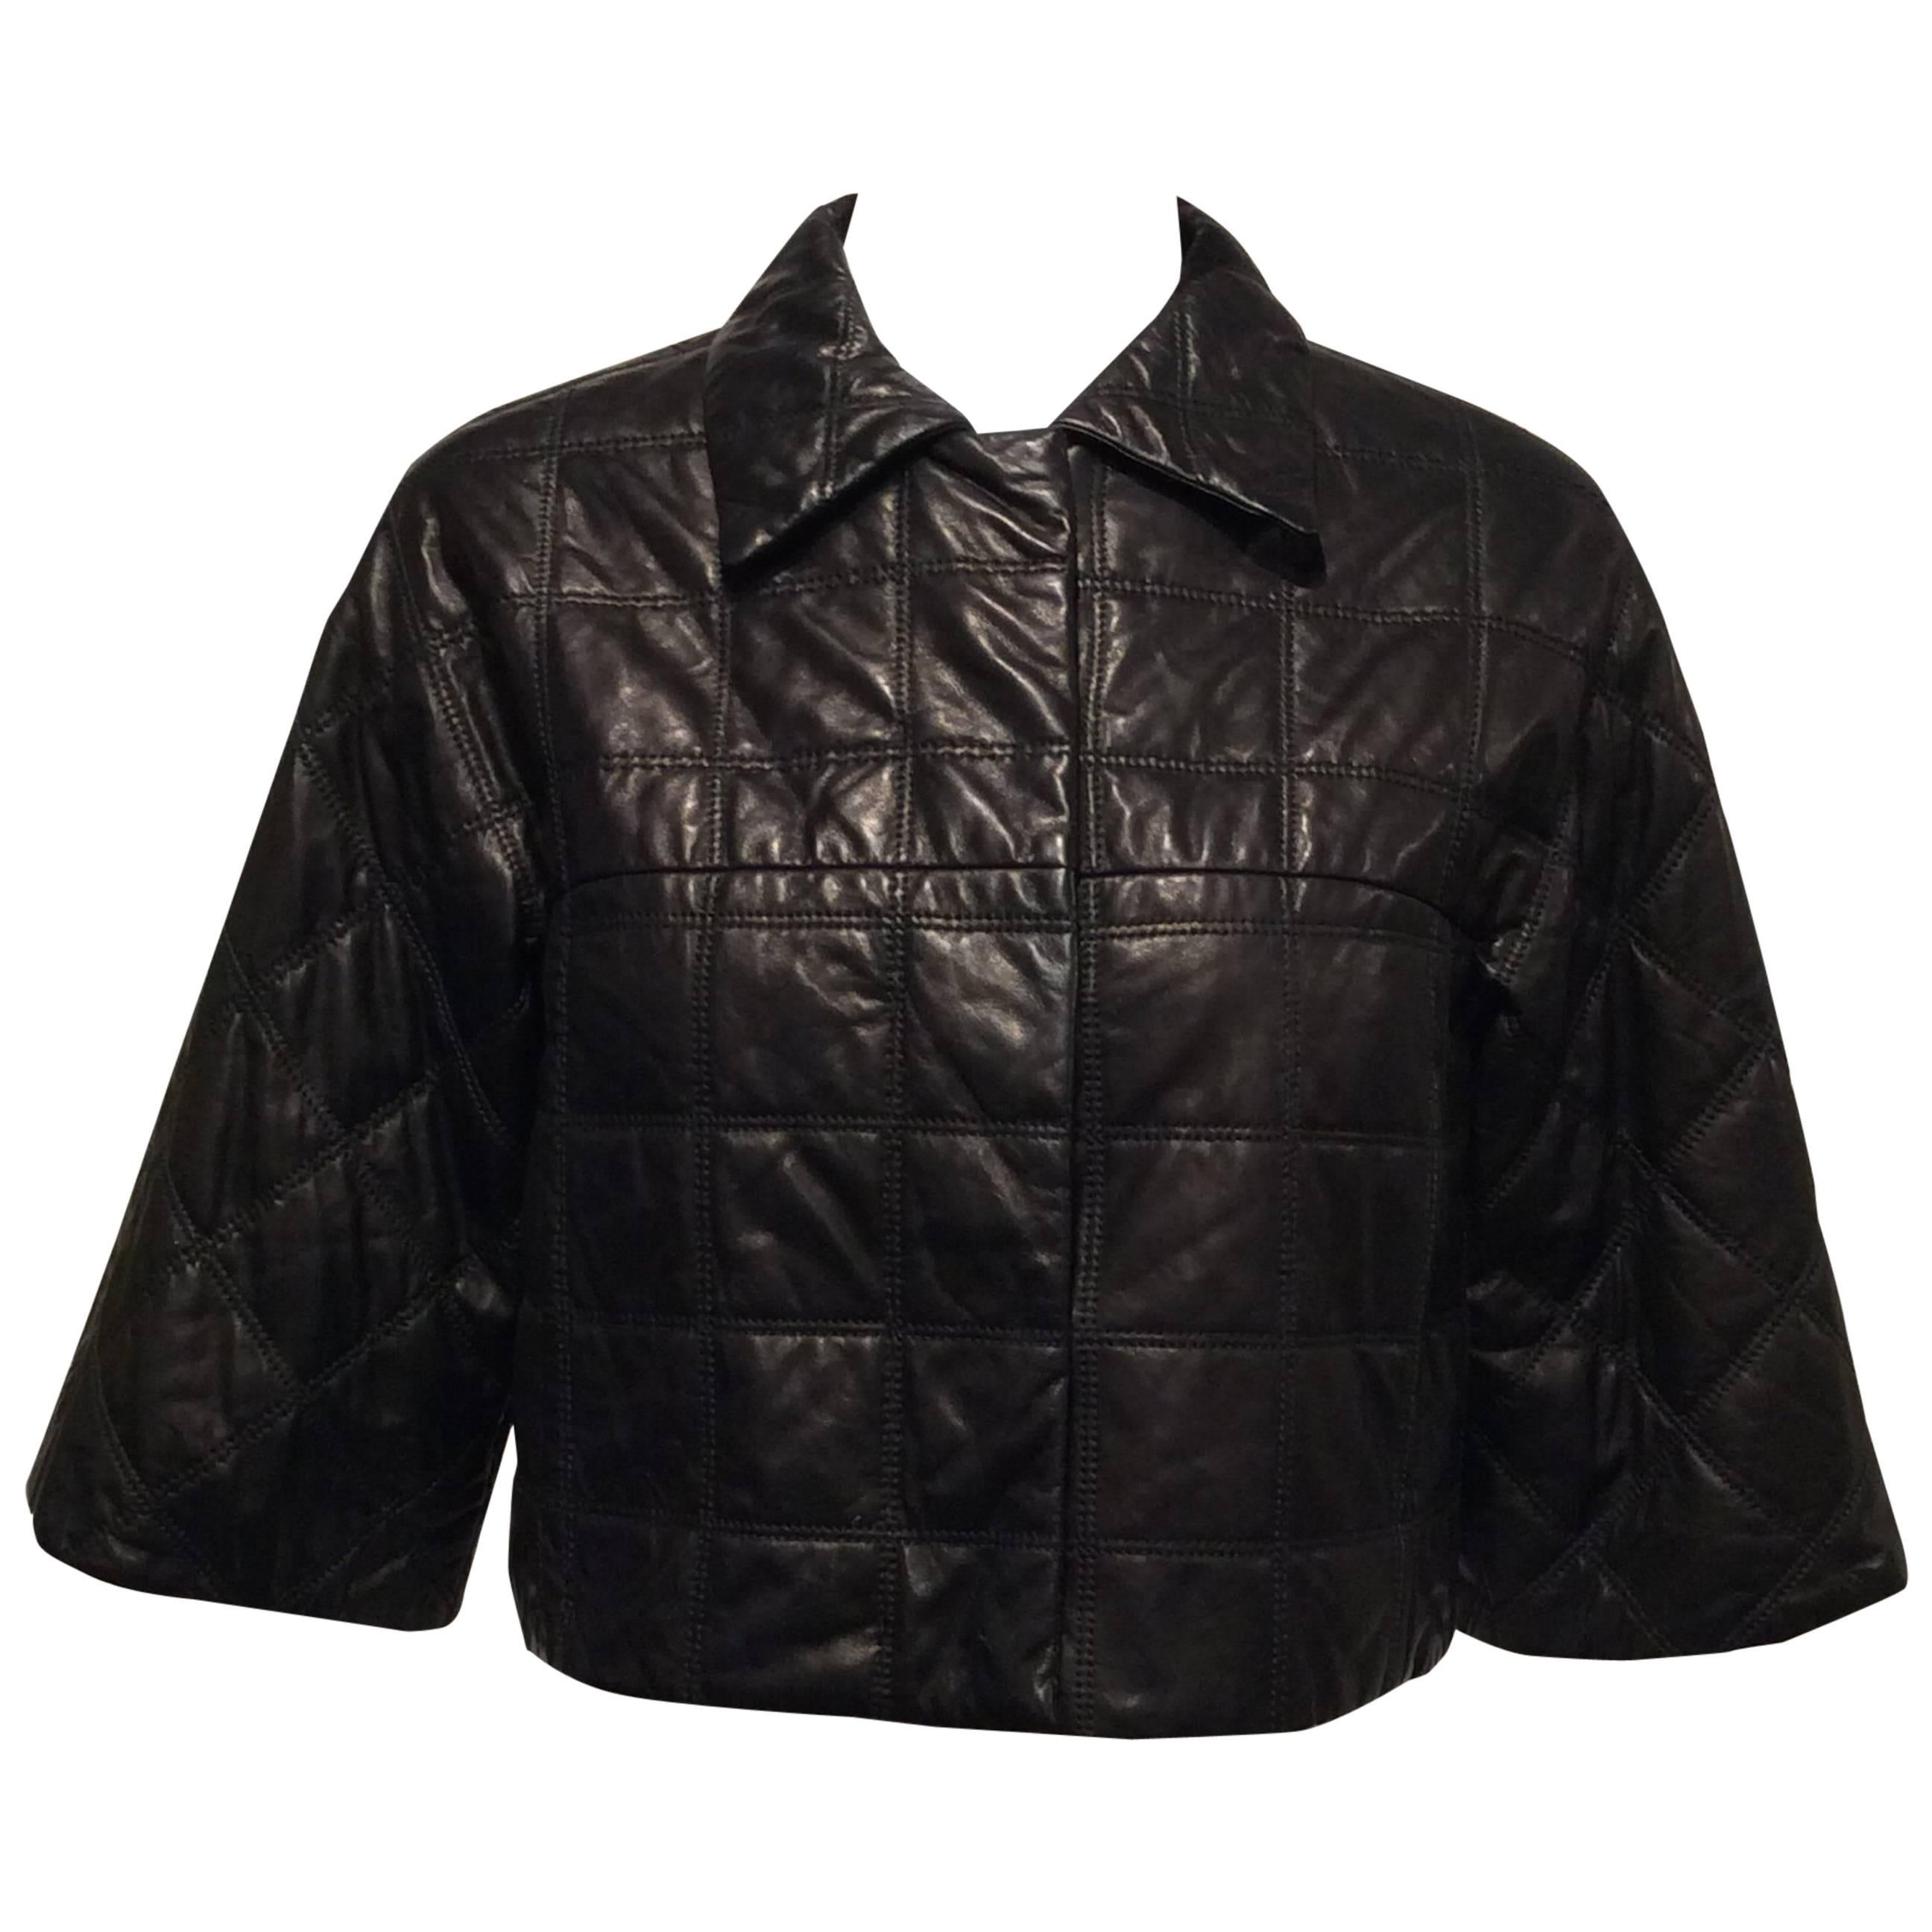 Prada Black With Quilted Pattern Leather Jacket Sz 38 (Us 2) For Sale